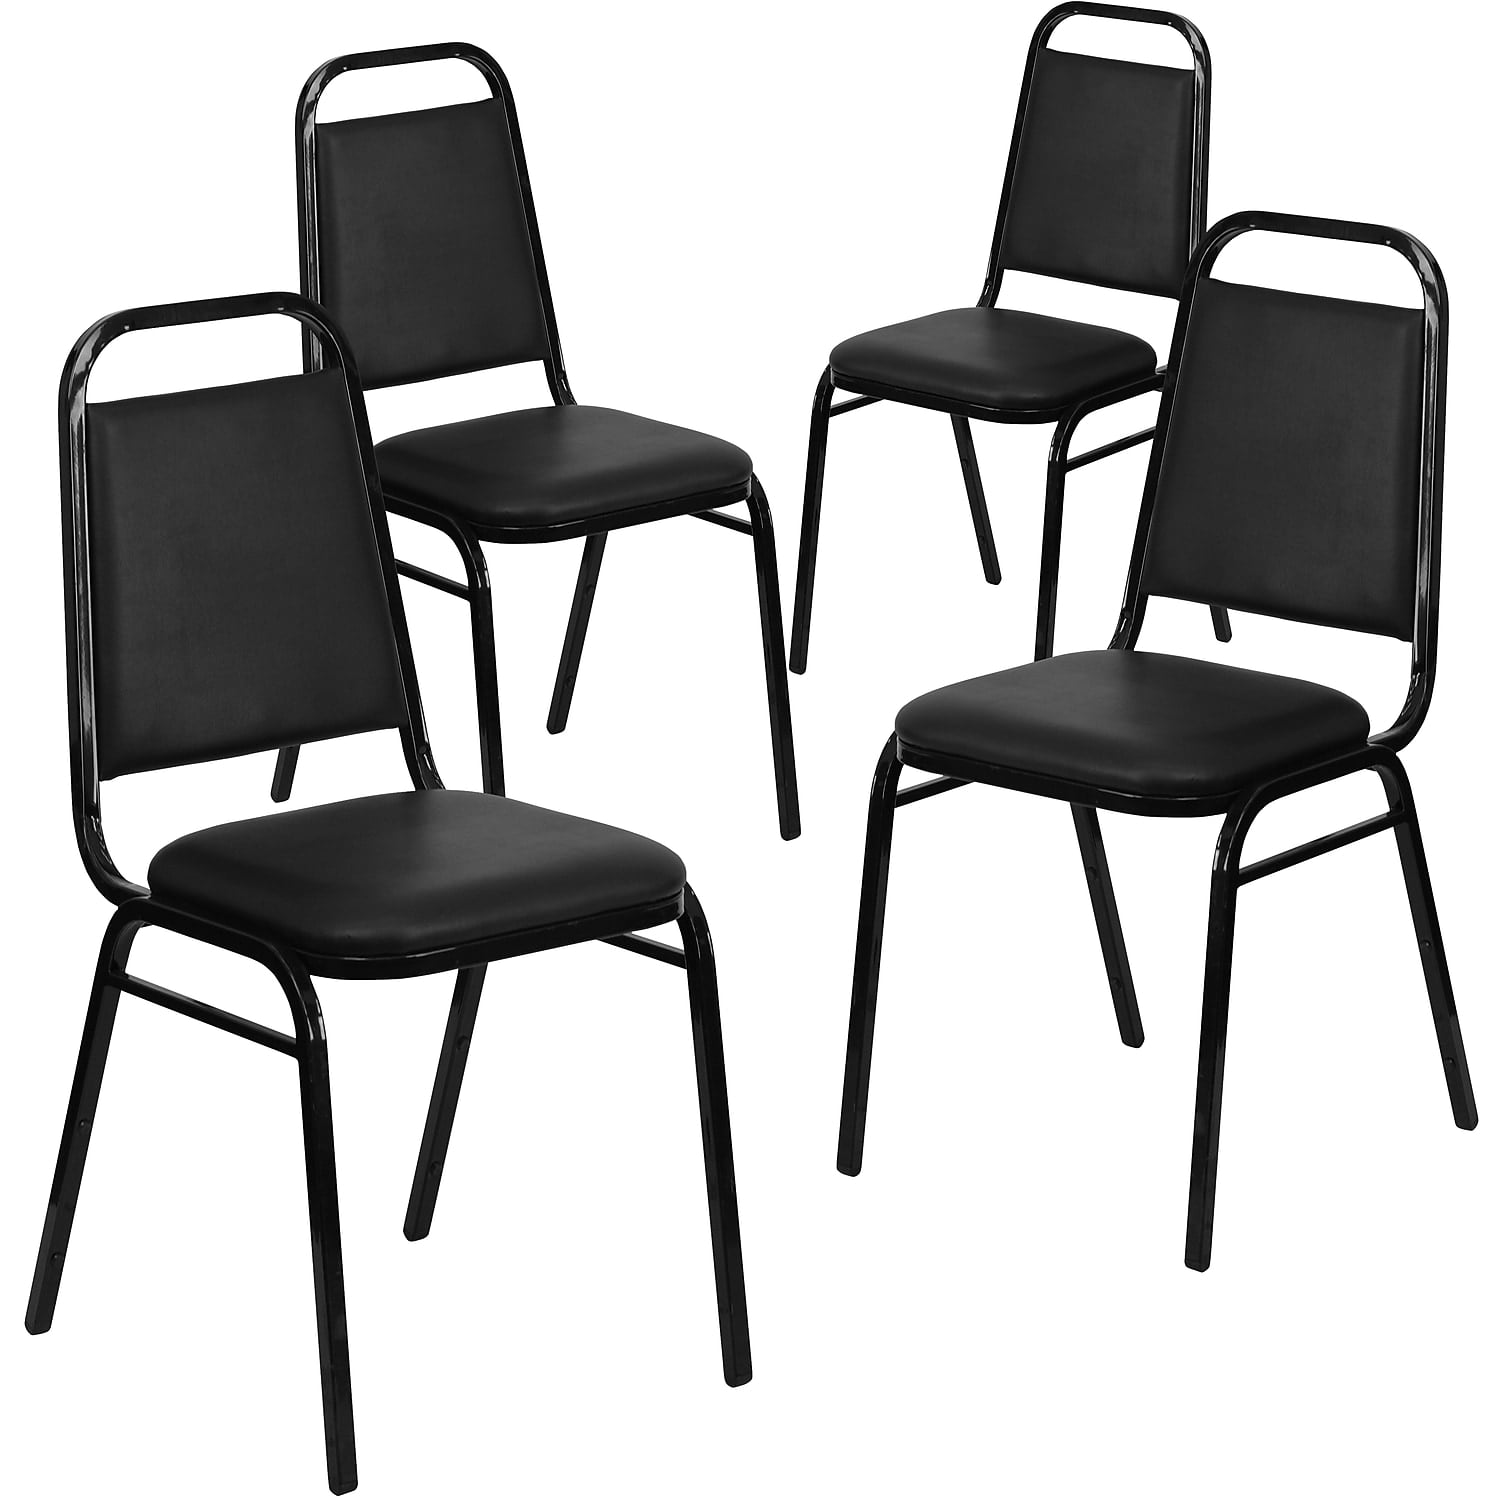 Details about   Thickly Padded Black Vinyl Banquet Catering Stack Chair 